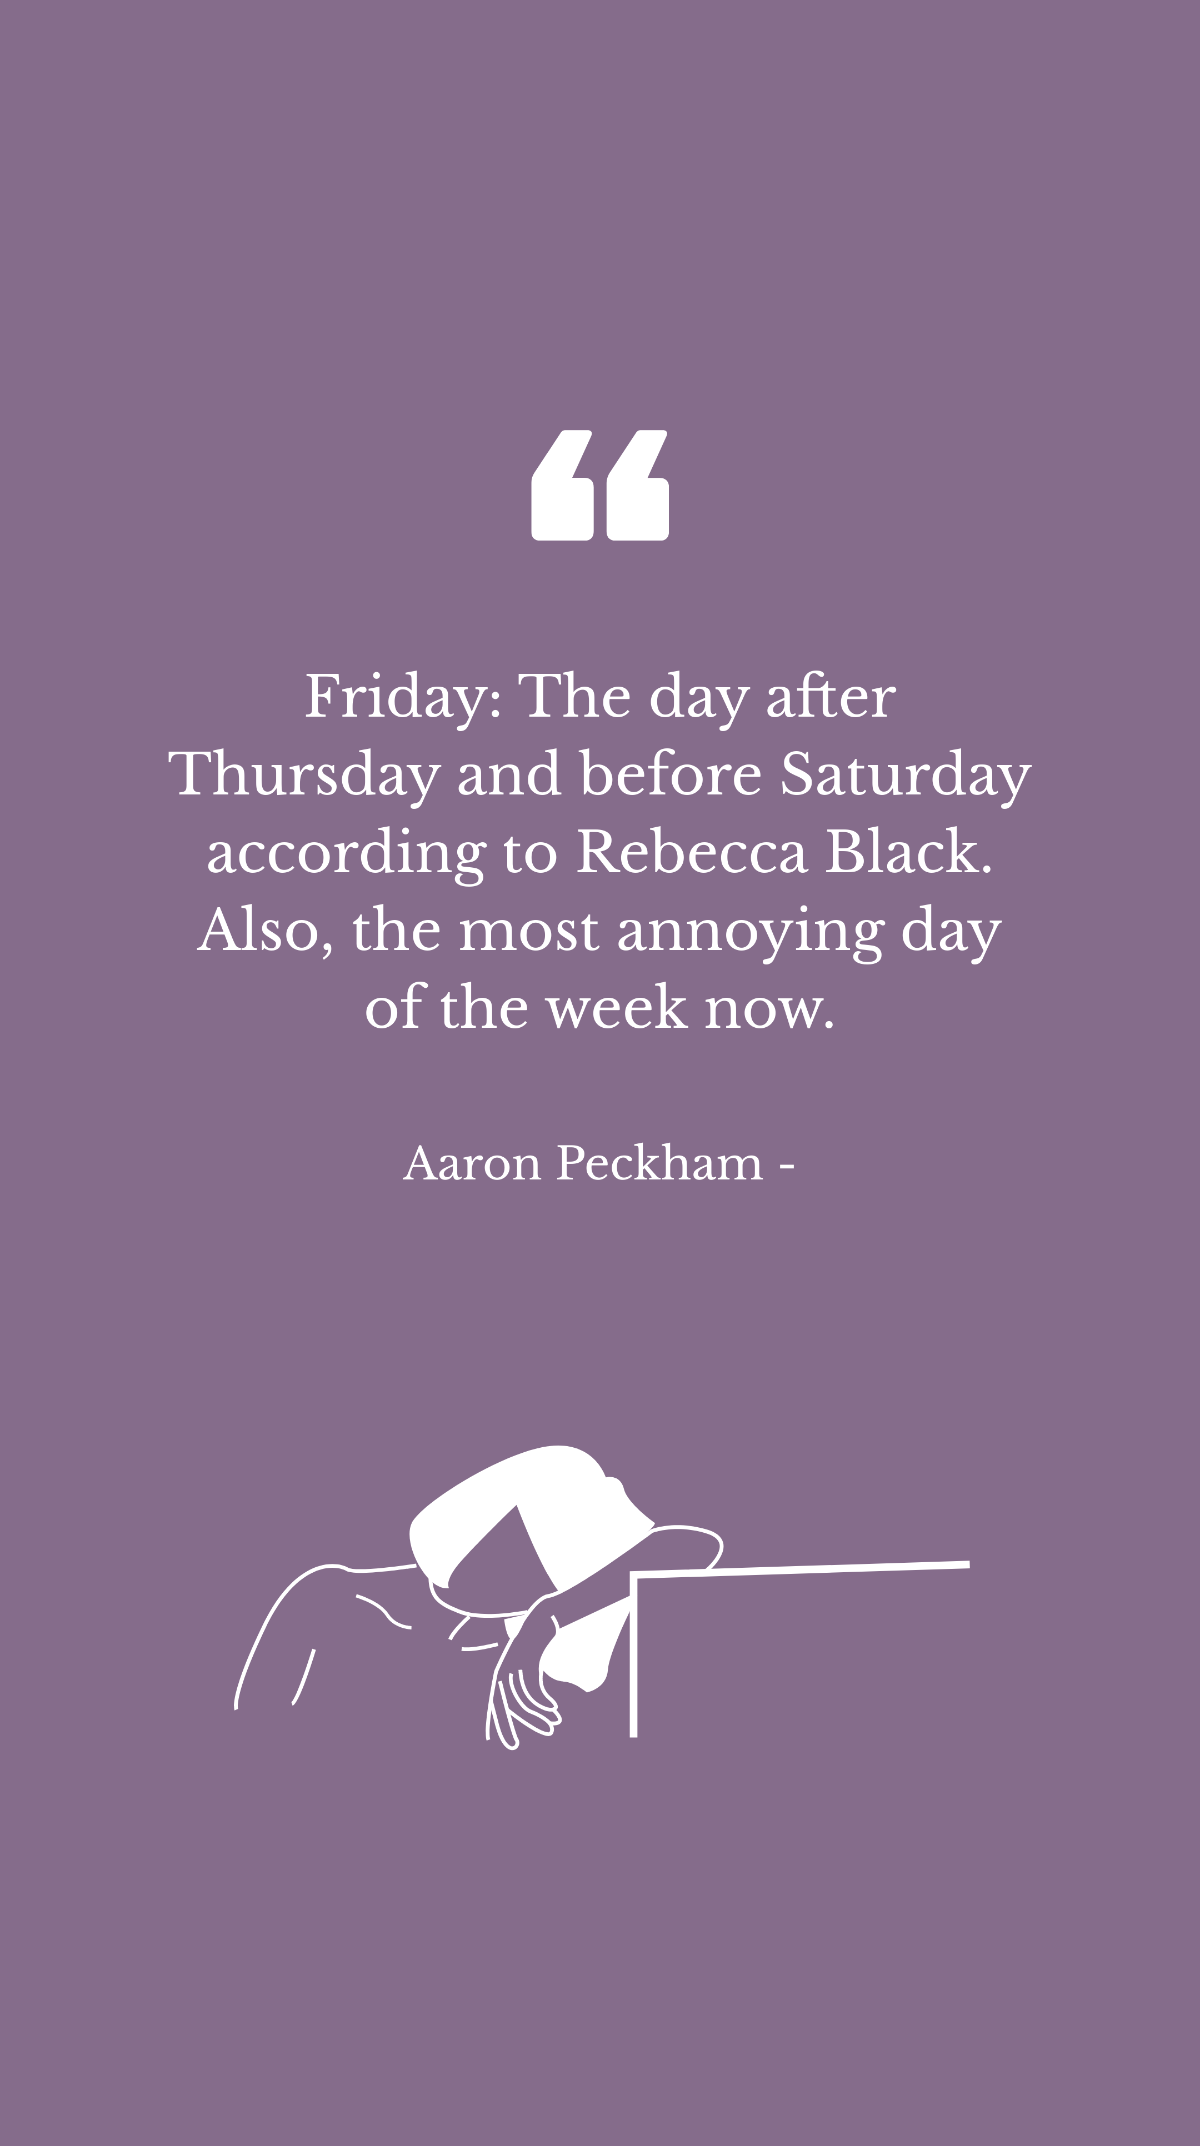 Aaron Peckham - Friday: The day after Thursday and before Saturday according to Rebecca Black. Also, the most annoying day of the week now. Template